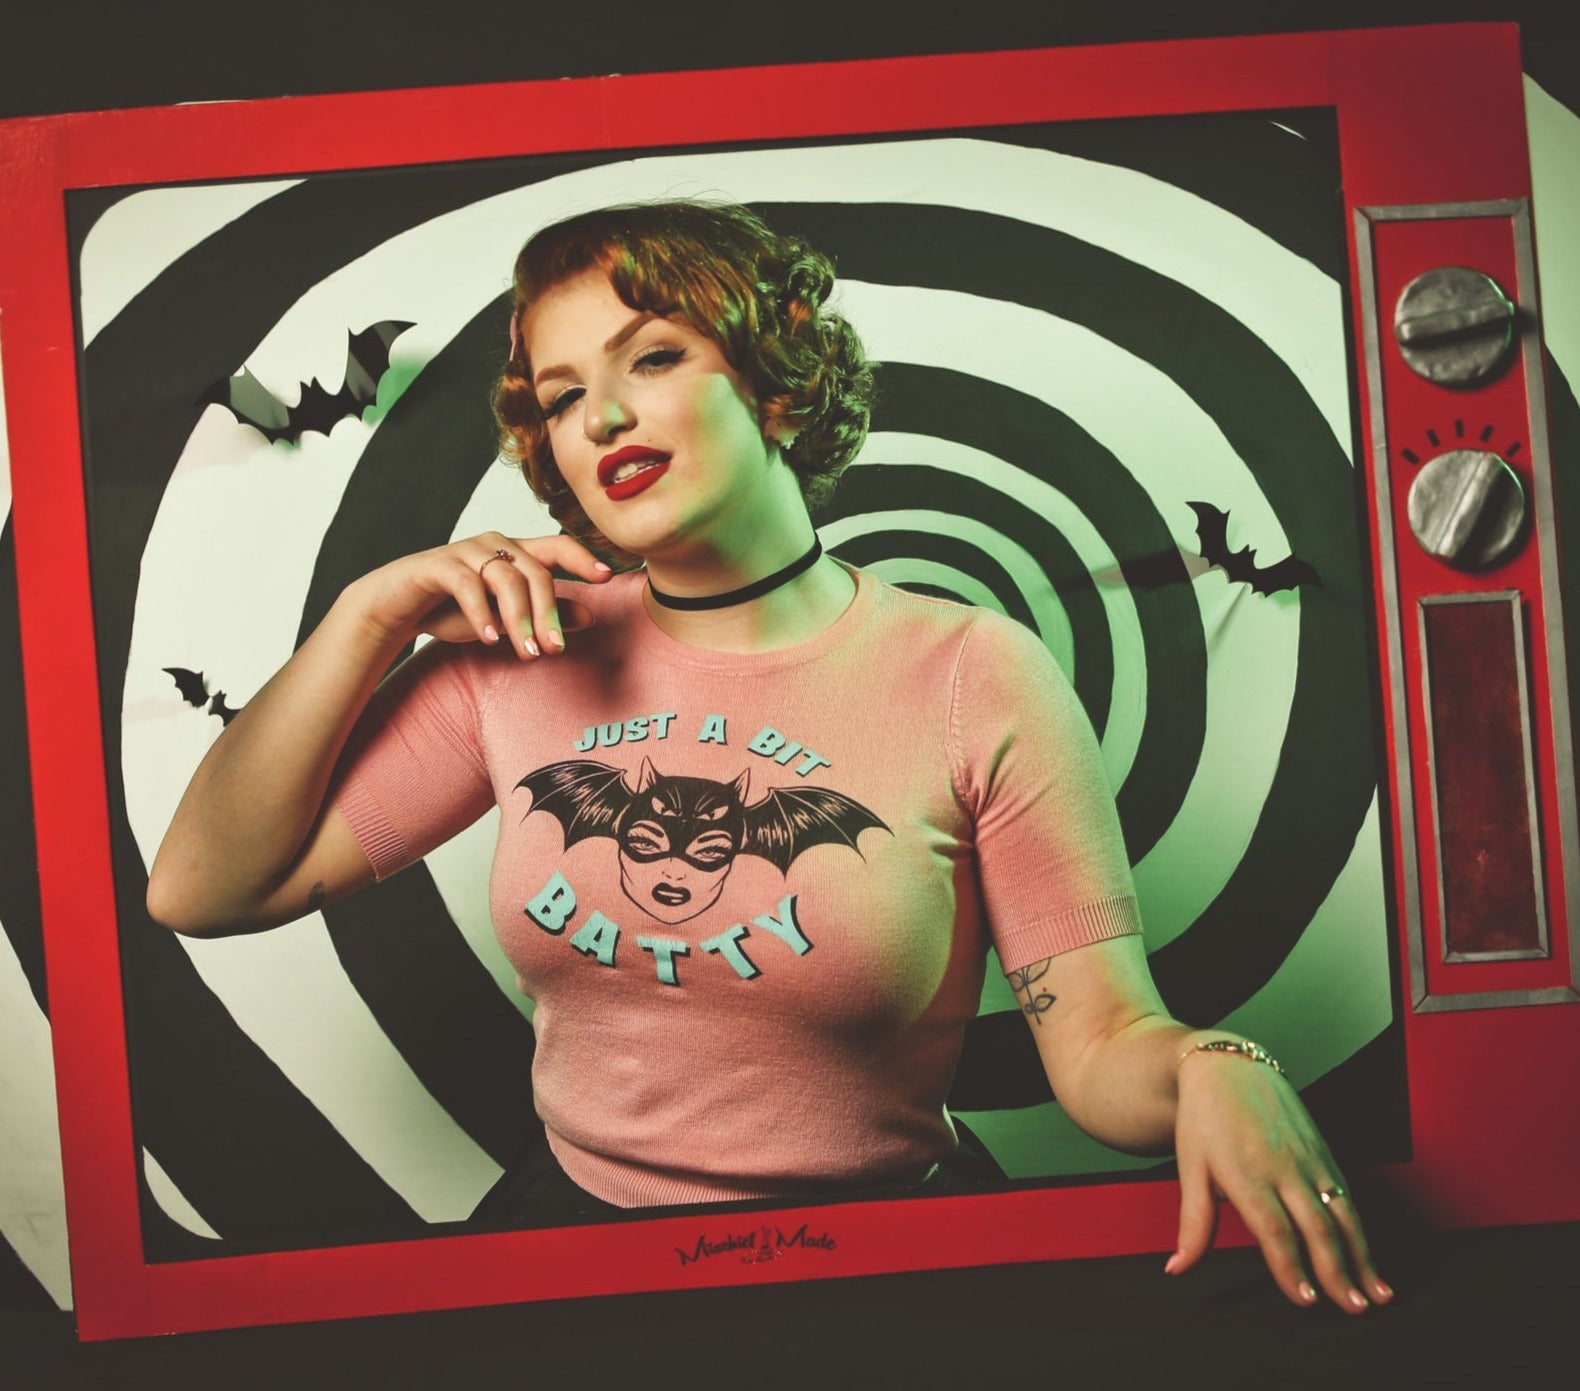 Model standing in a cardboard set meant to look like an old fashioned television screen. Wearing pink crew neck short sleeved sweater with retro woman wearing a bat mask and “Just a Bit Batty” written in bright blue